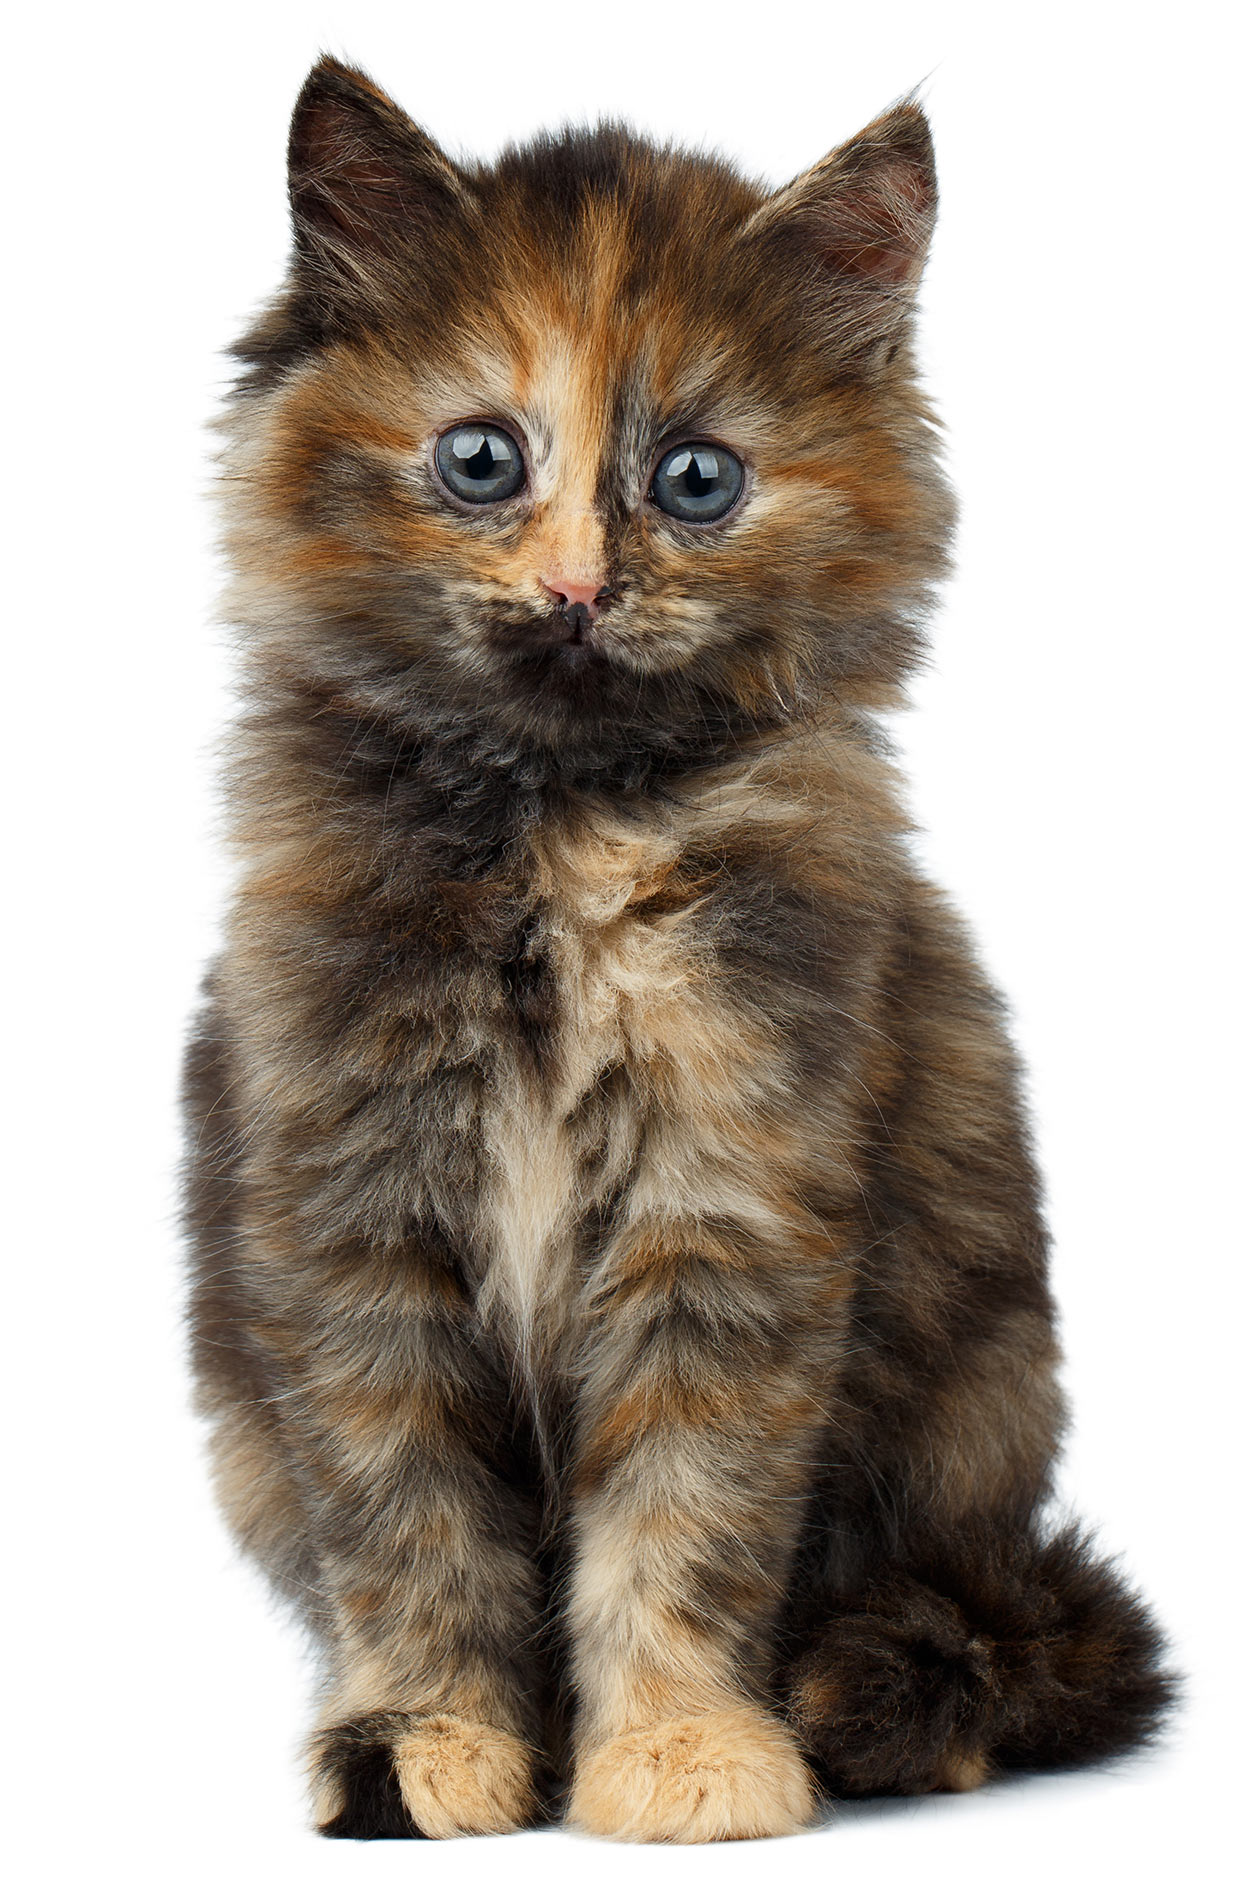 30 Things You Never Knew About The Tortoiseshell Cat